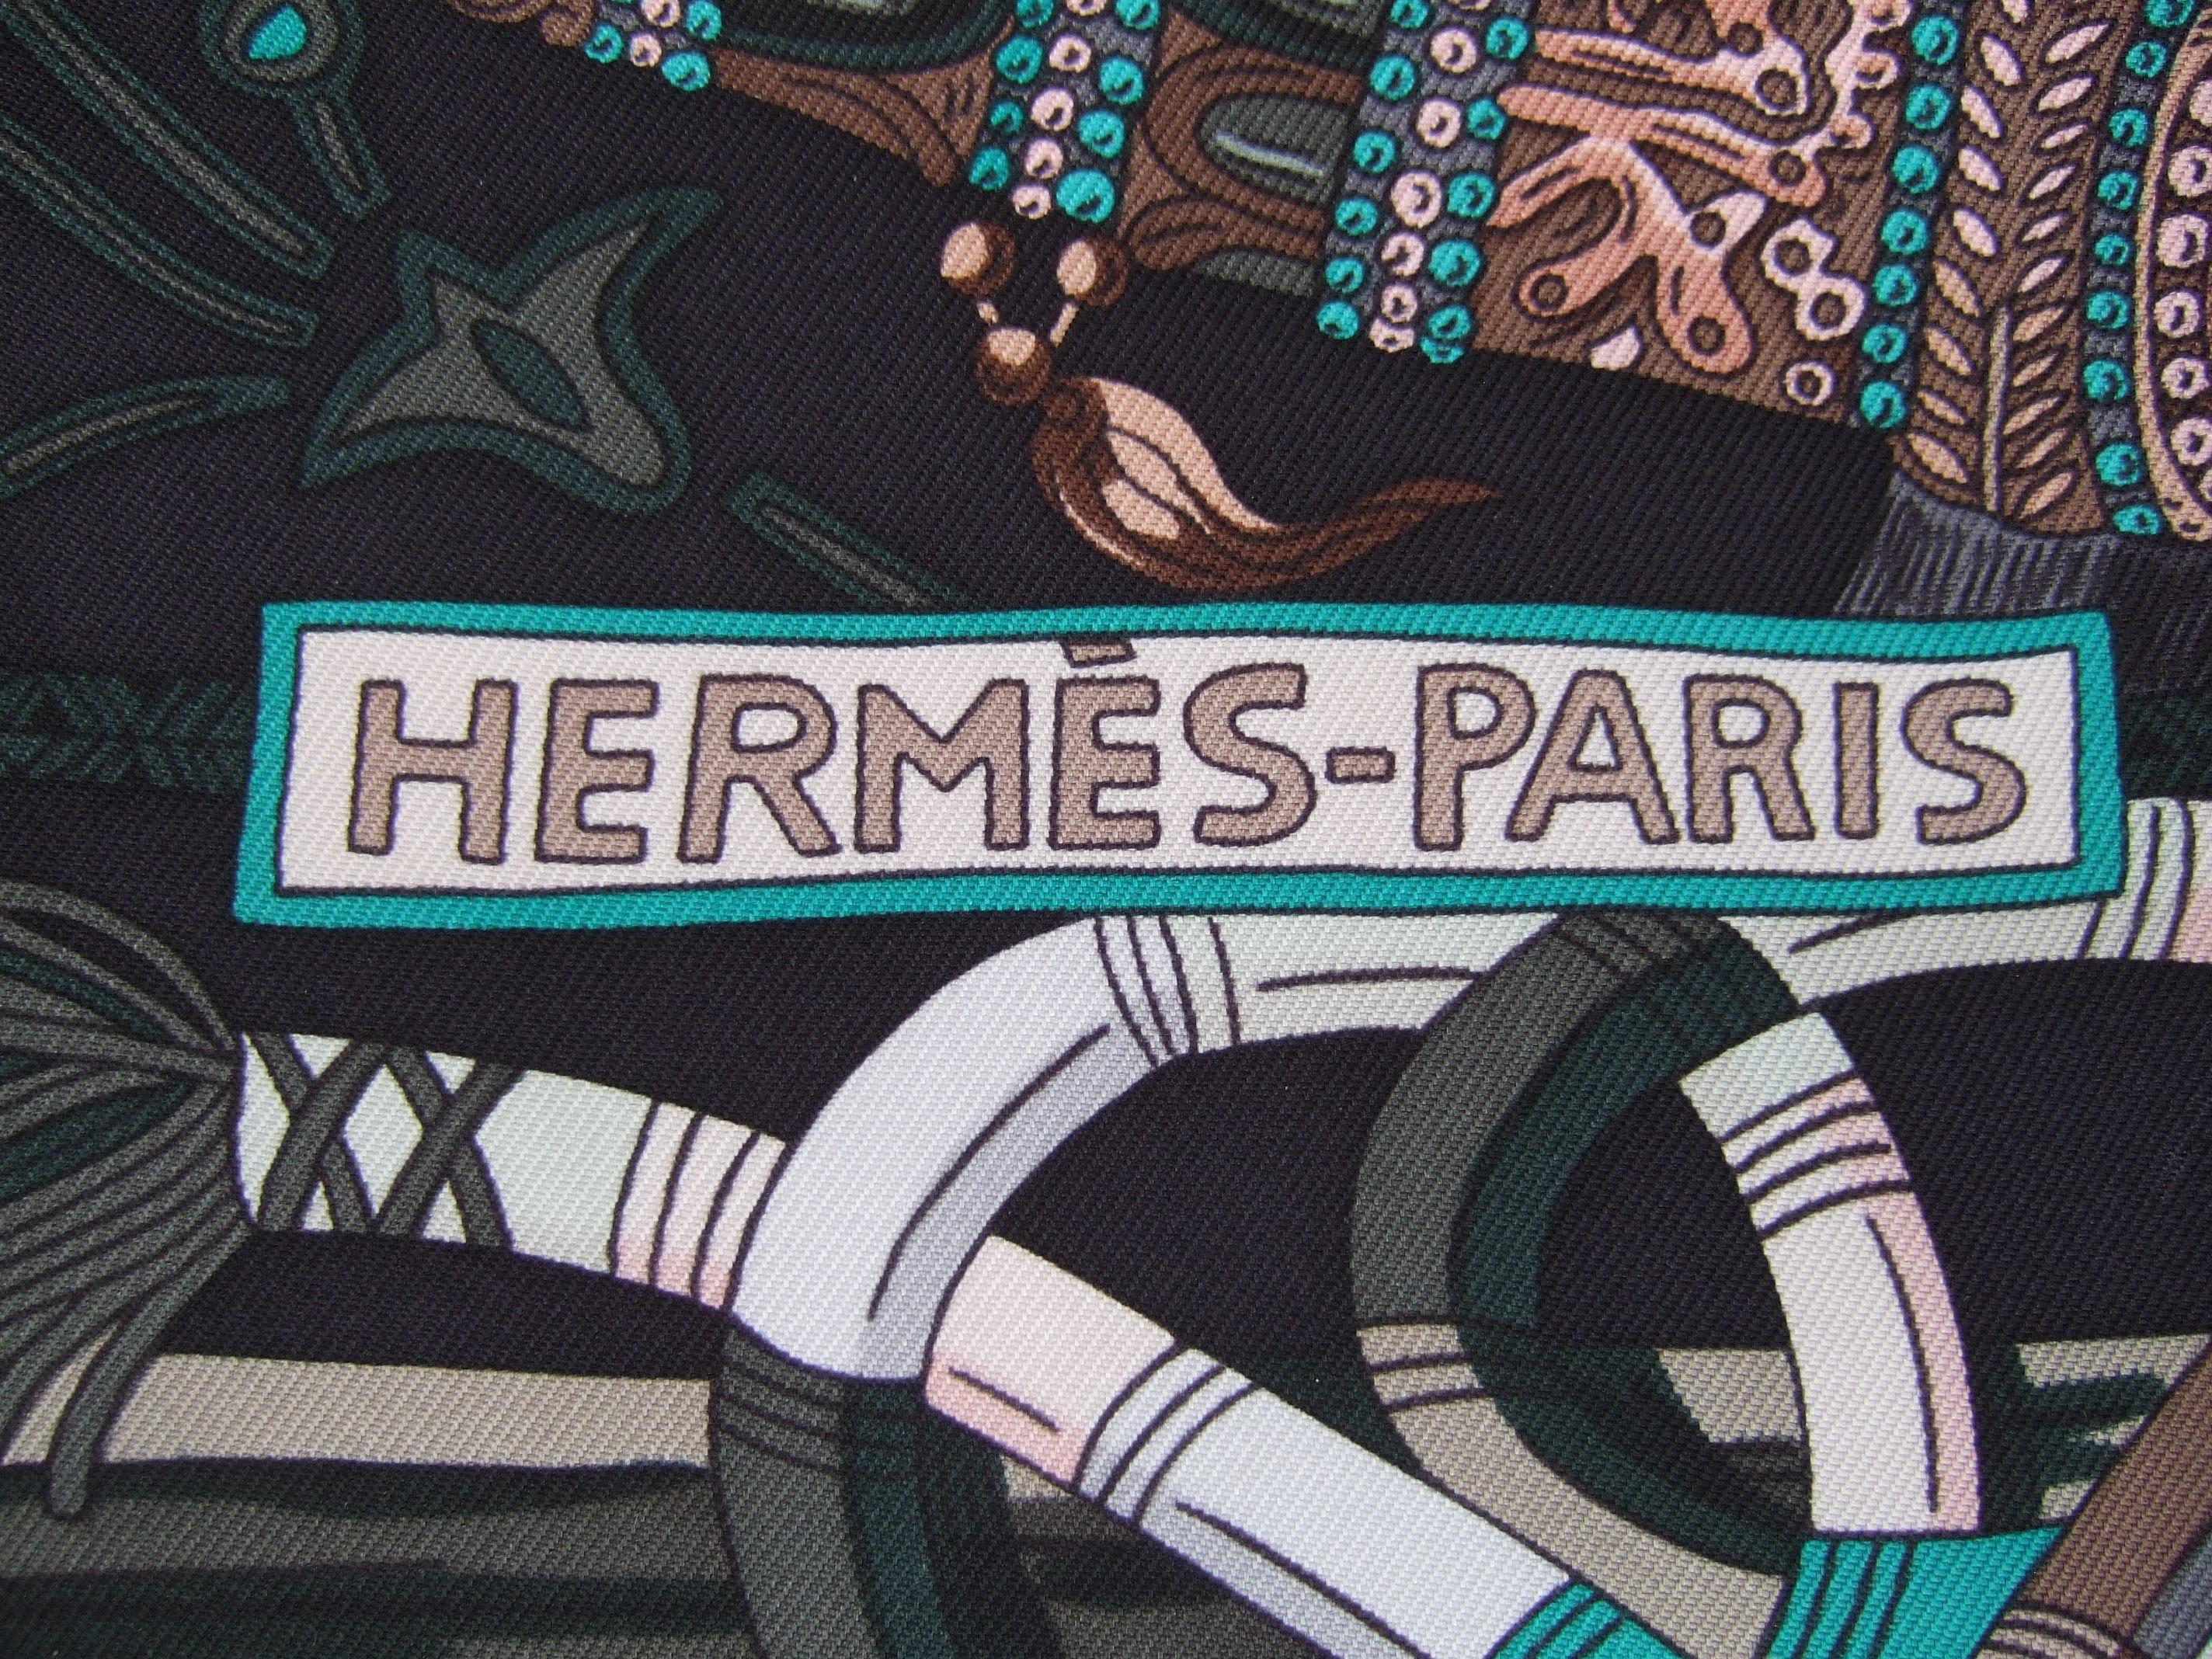 Hermes Paris Elegant silk hand rolled animal themed scarf 34.5 x 33.5 
The luxurious silk scarf is illustrated with exotic monkey's, majestic horses,
birds with schools of fish gliding through coral reefs. Accented with radiating 
sun faces

The